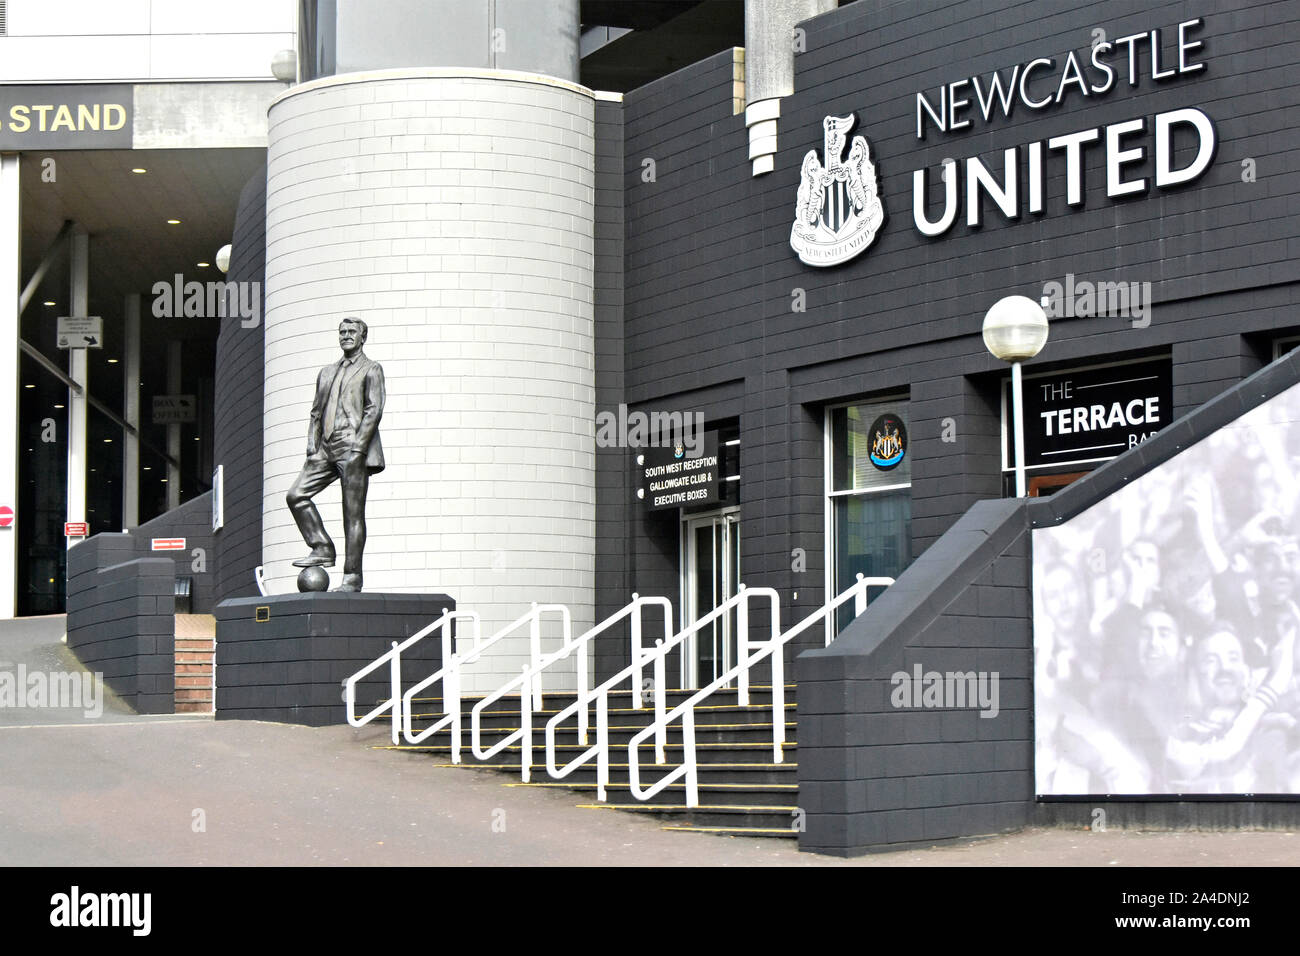 Newcastle United Football Club part of the St James Park stadium with bronze statue of famous Sir Bobby Robson football player & manager England UK Stock Photo